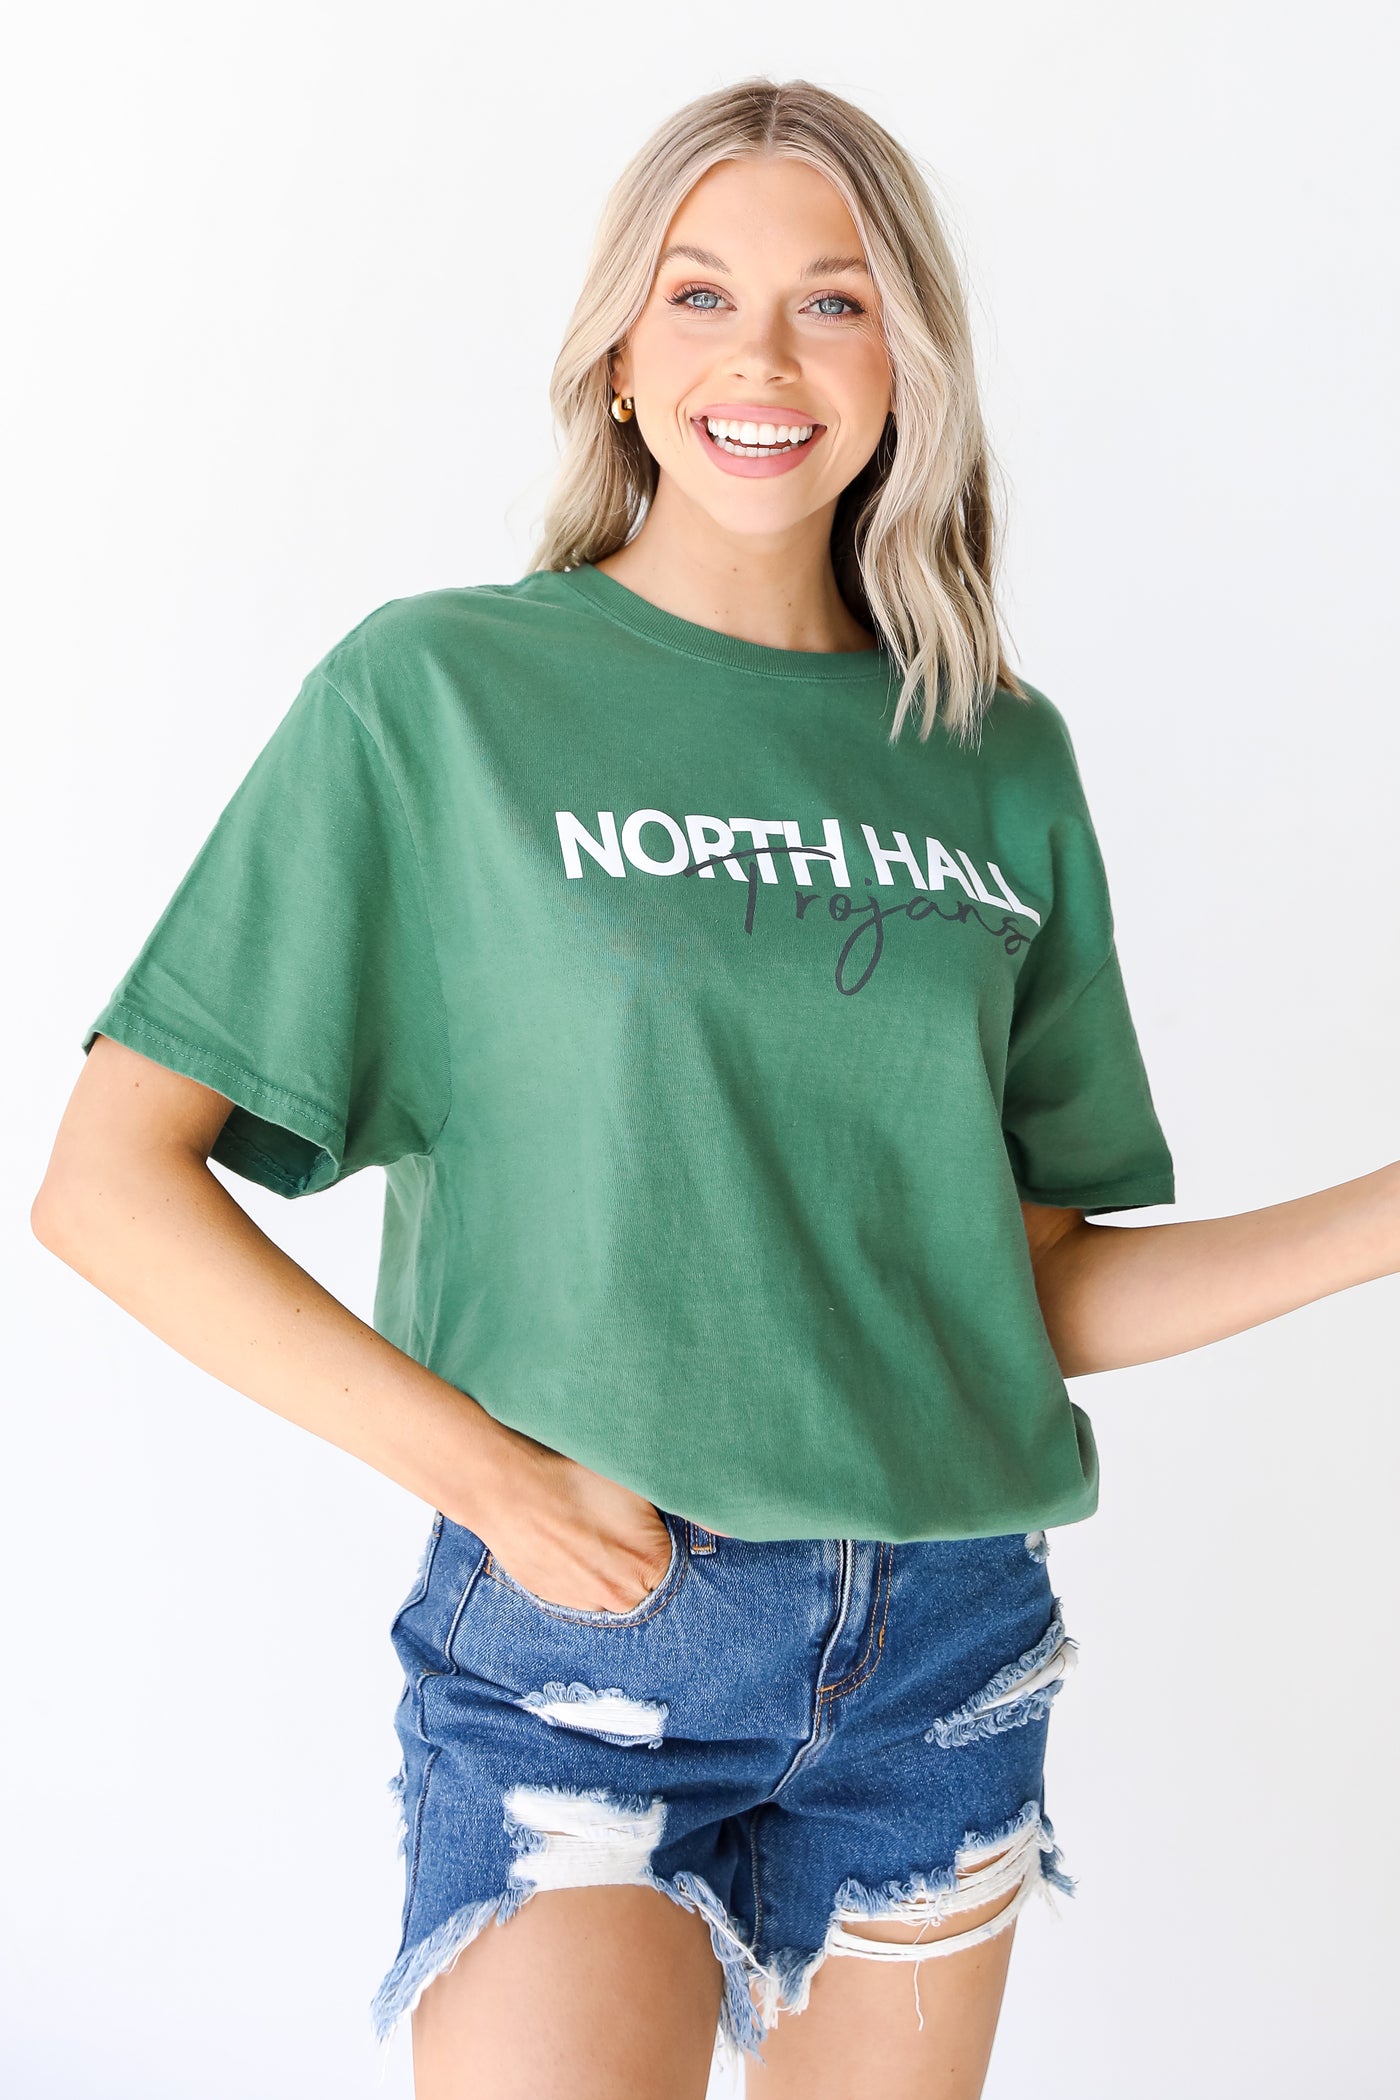 Green North Hall Trojans Tee front view